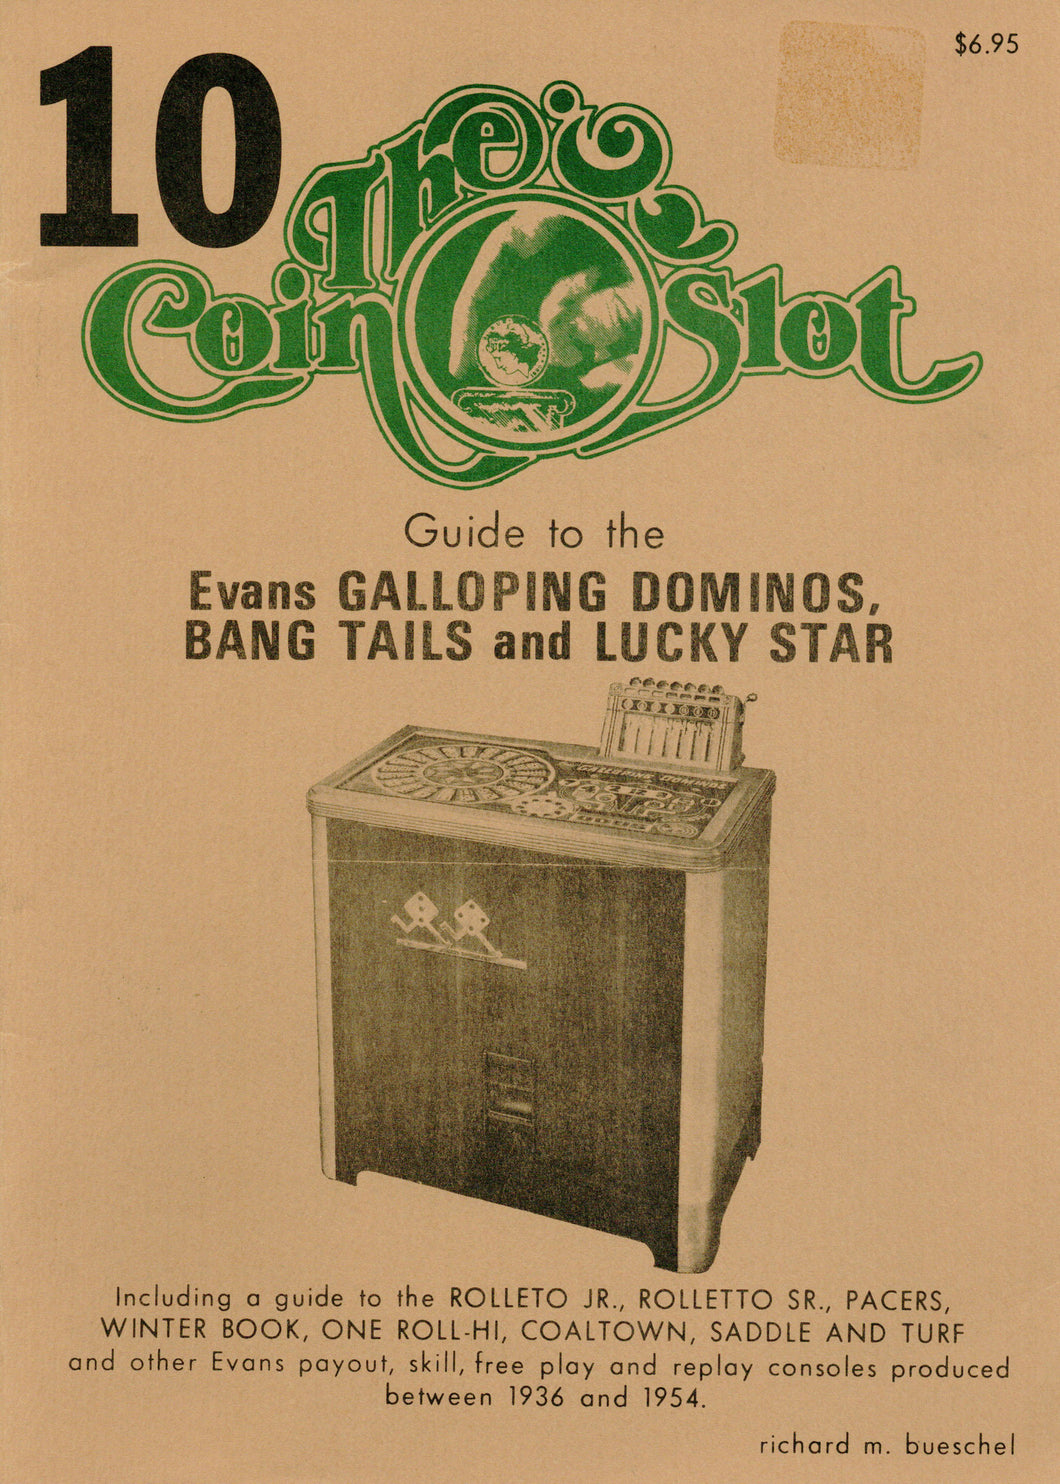 Coin Slot #10. Guide to the Evans Galloping Dominos, Bang Tails and Lucky Star